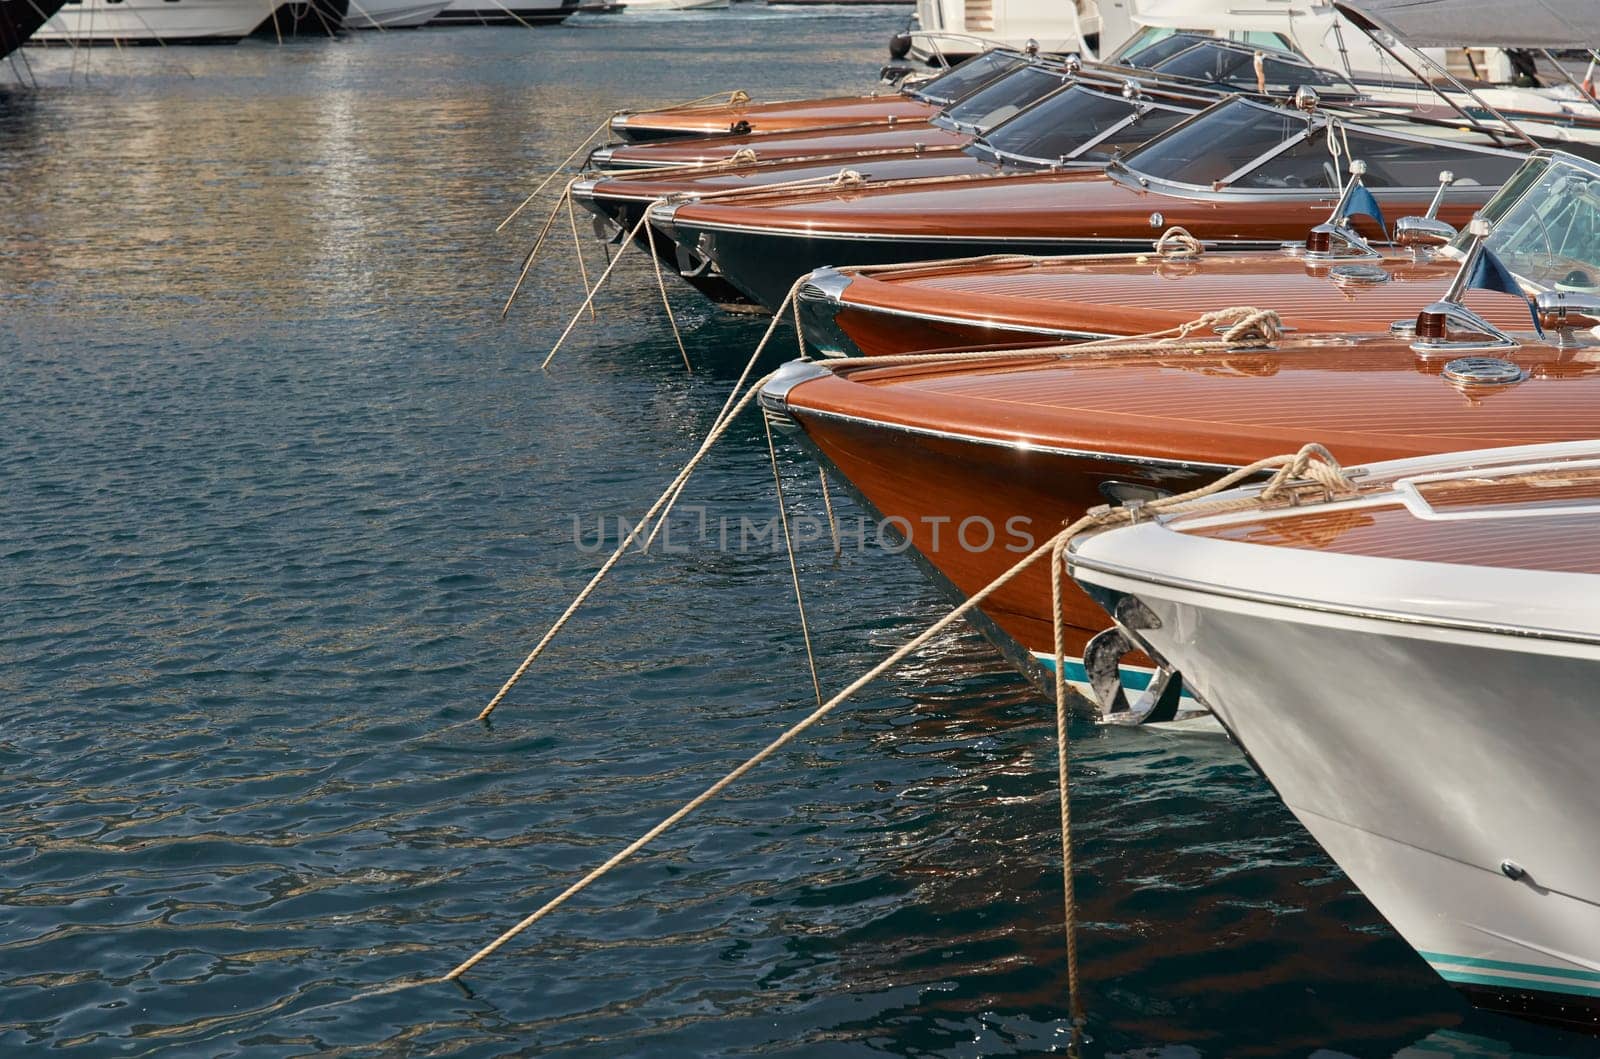 Few luxury retro motor boats in row at the famous motorboat exhibition in the principality of Monaco, Monte Carlo, the most expensive boats for the richest people, boats for rich clients by vladimirdrozdin